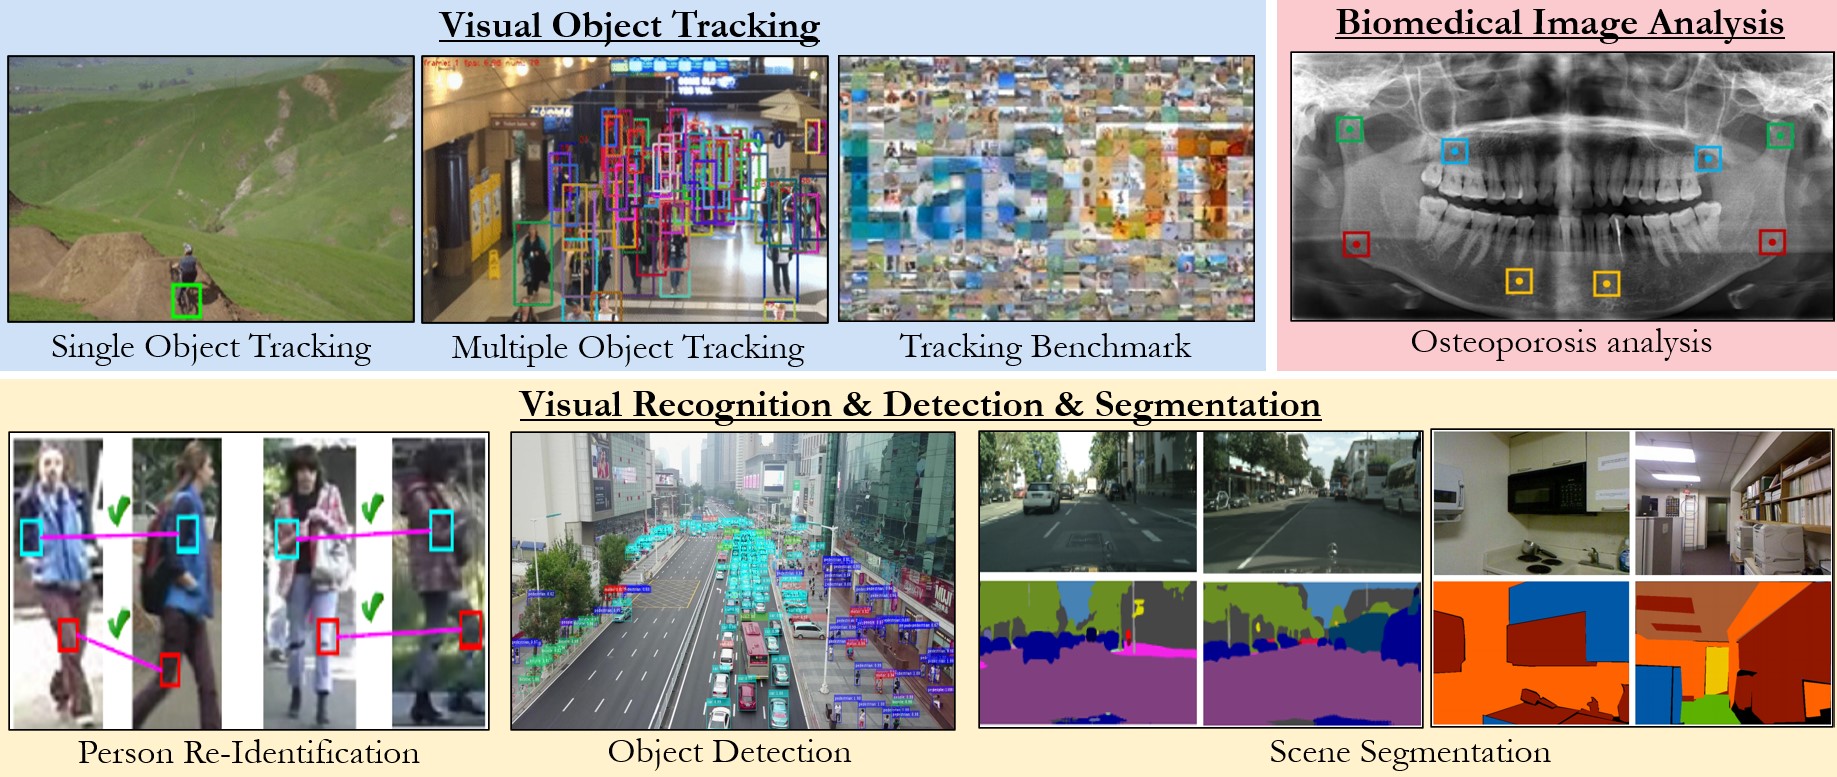 Images with color squares on detected objects.